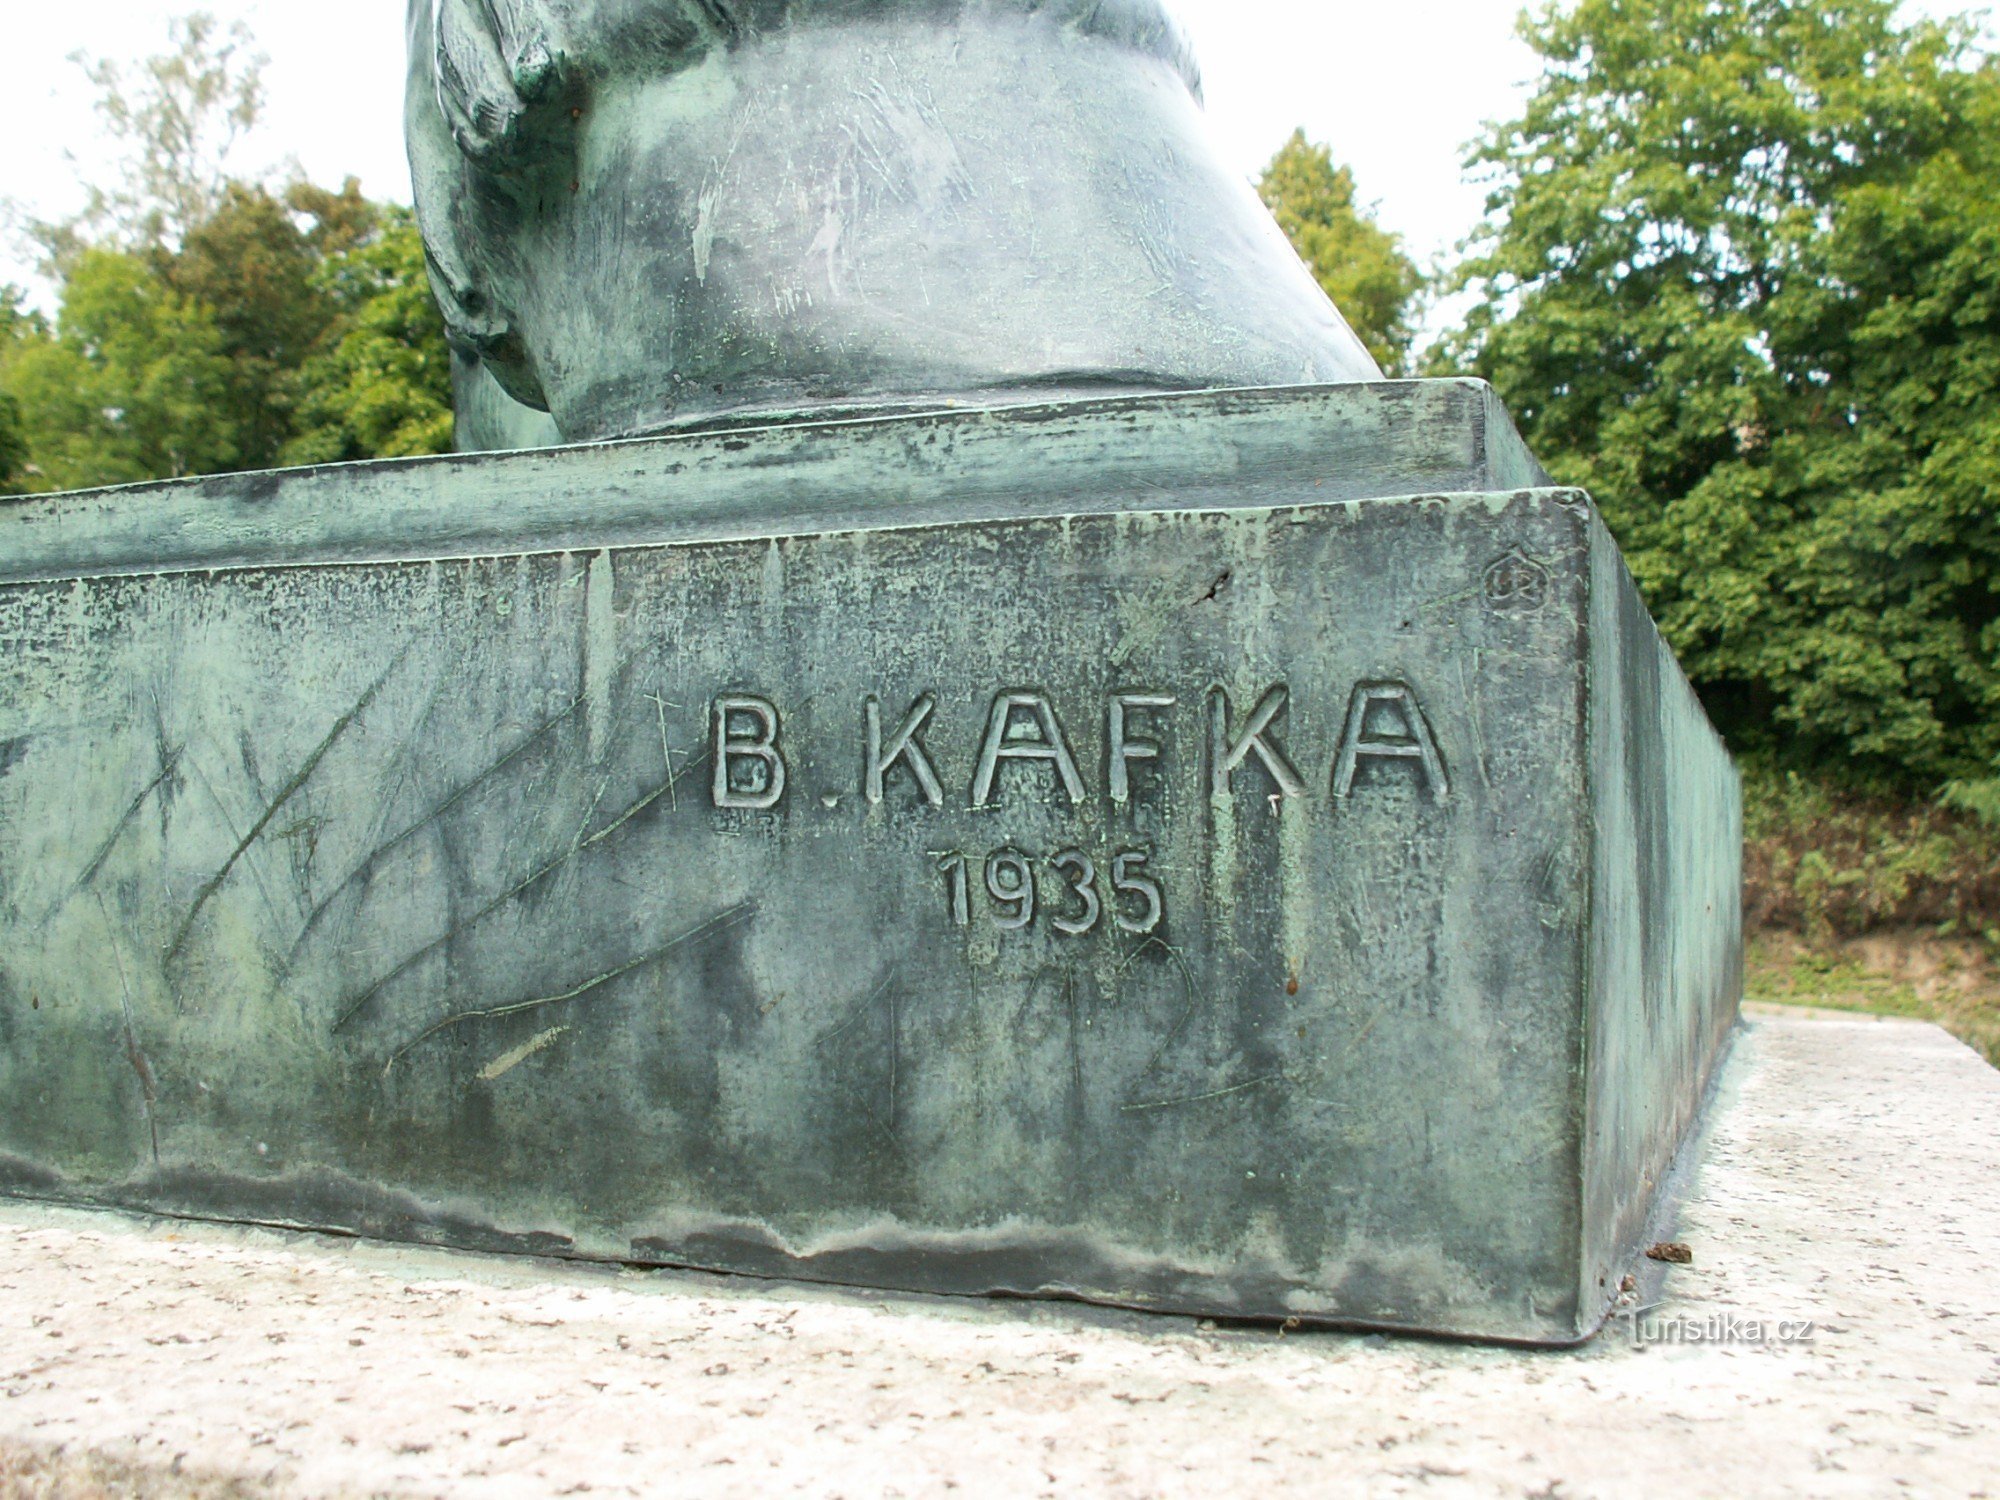 Detail of the statue with the name of its author